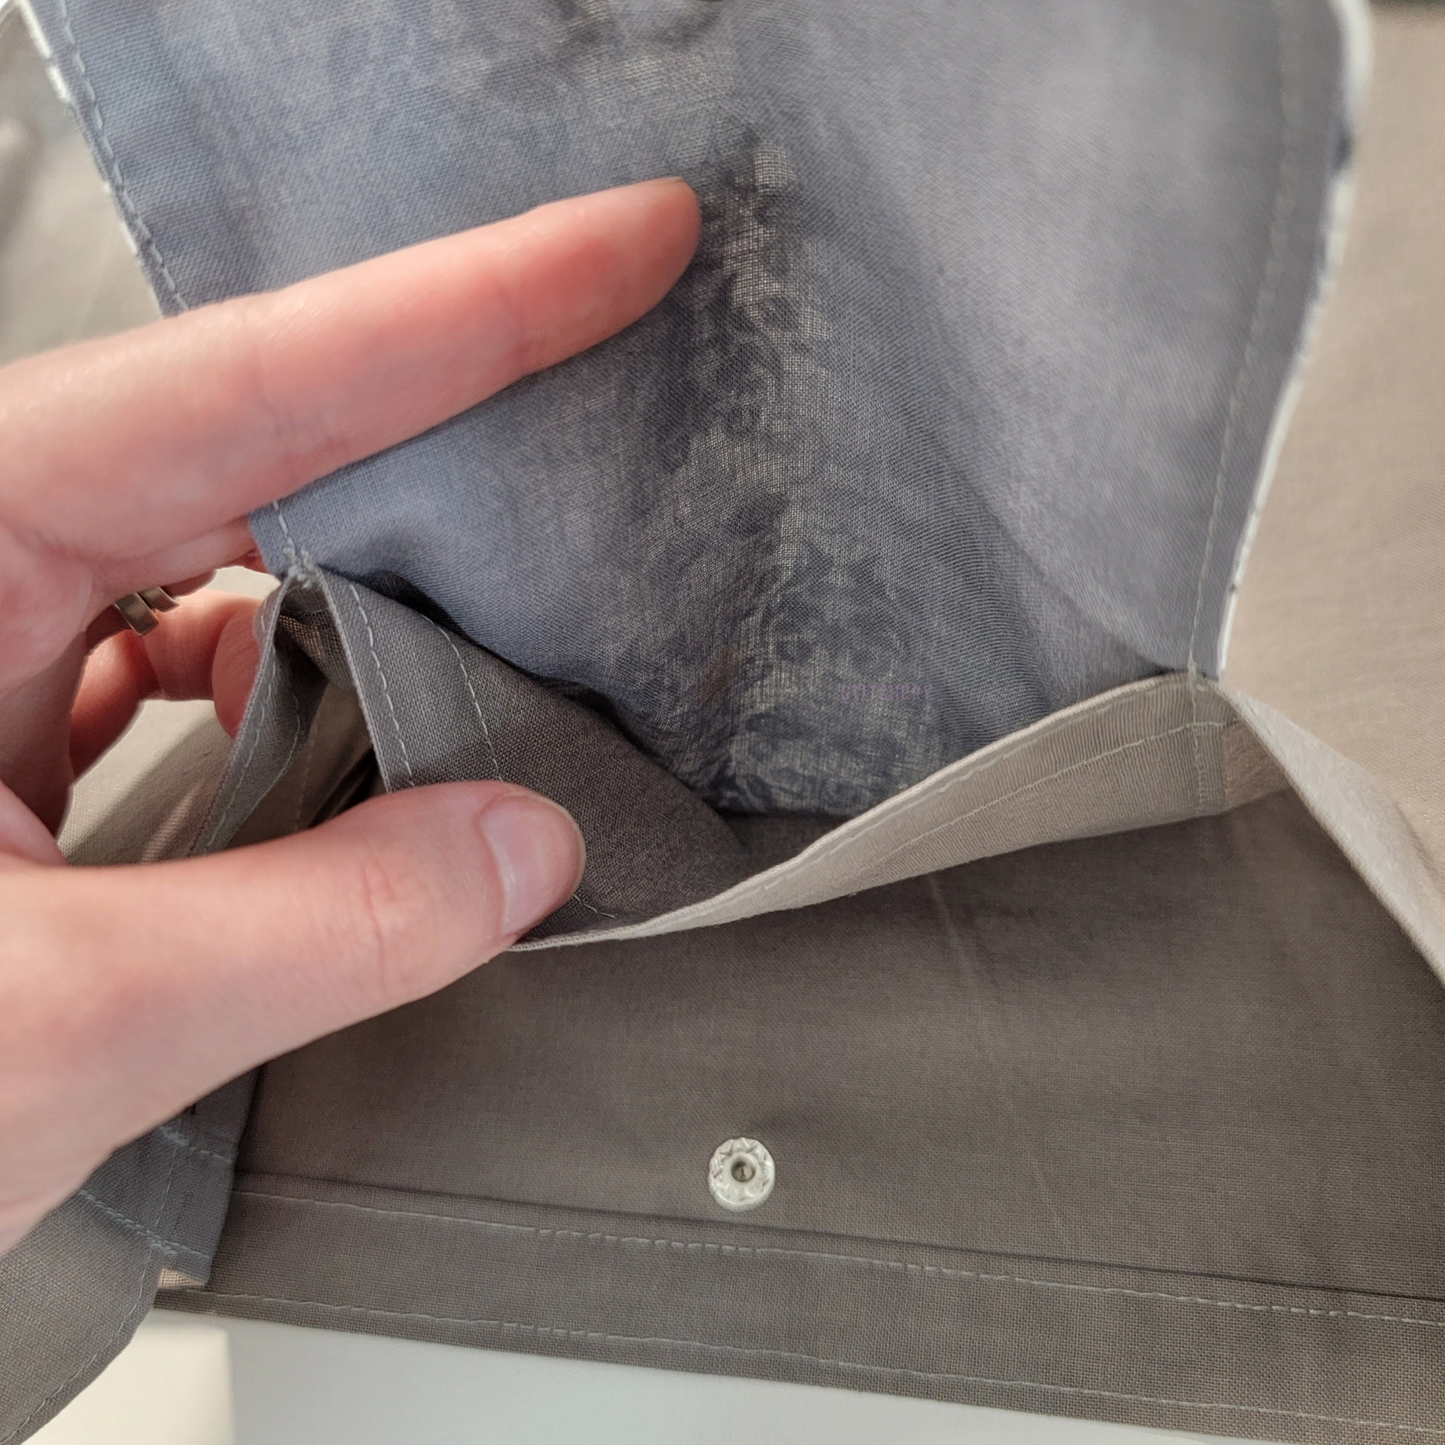 Inside of the foldable tote bag, a hidden pocket underneath the flap.